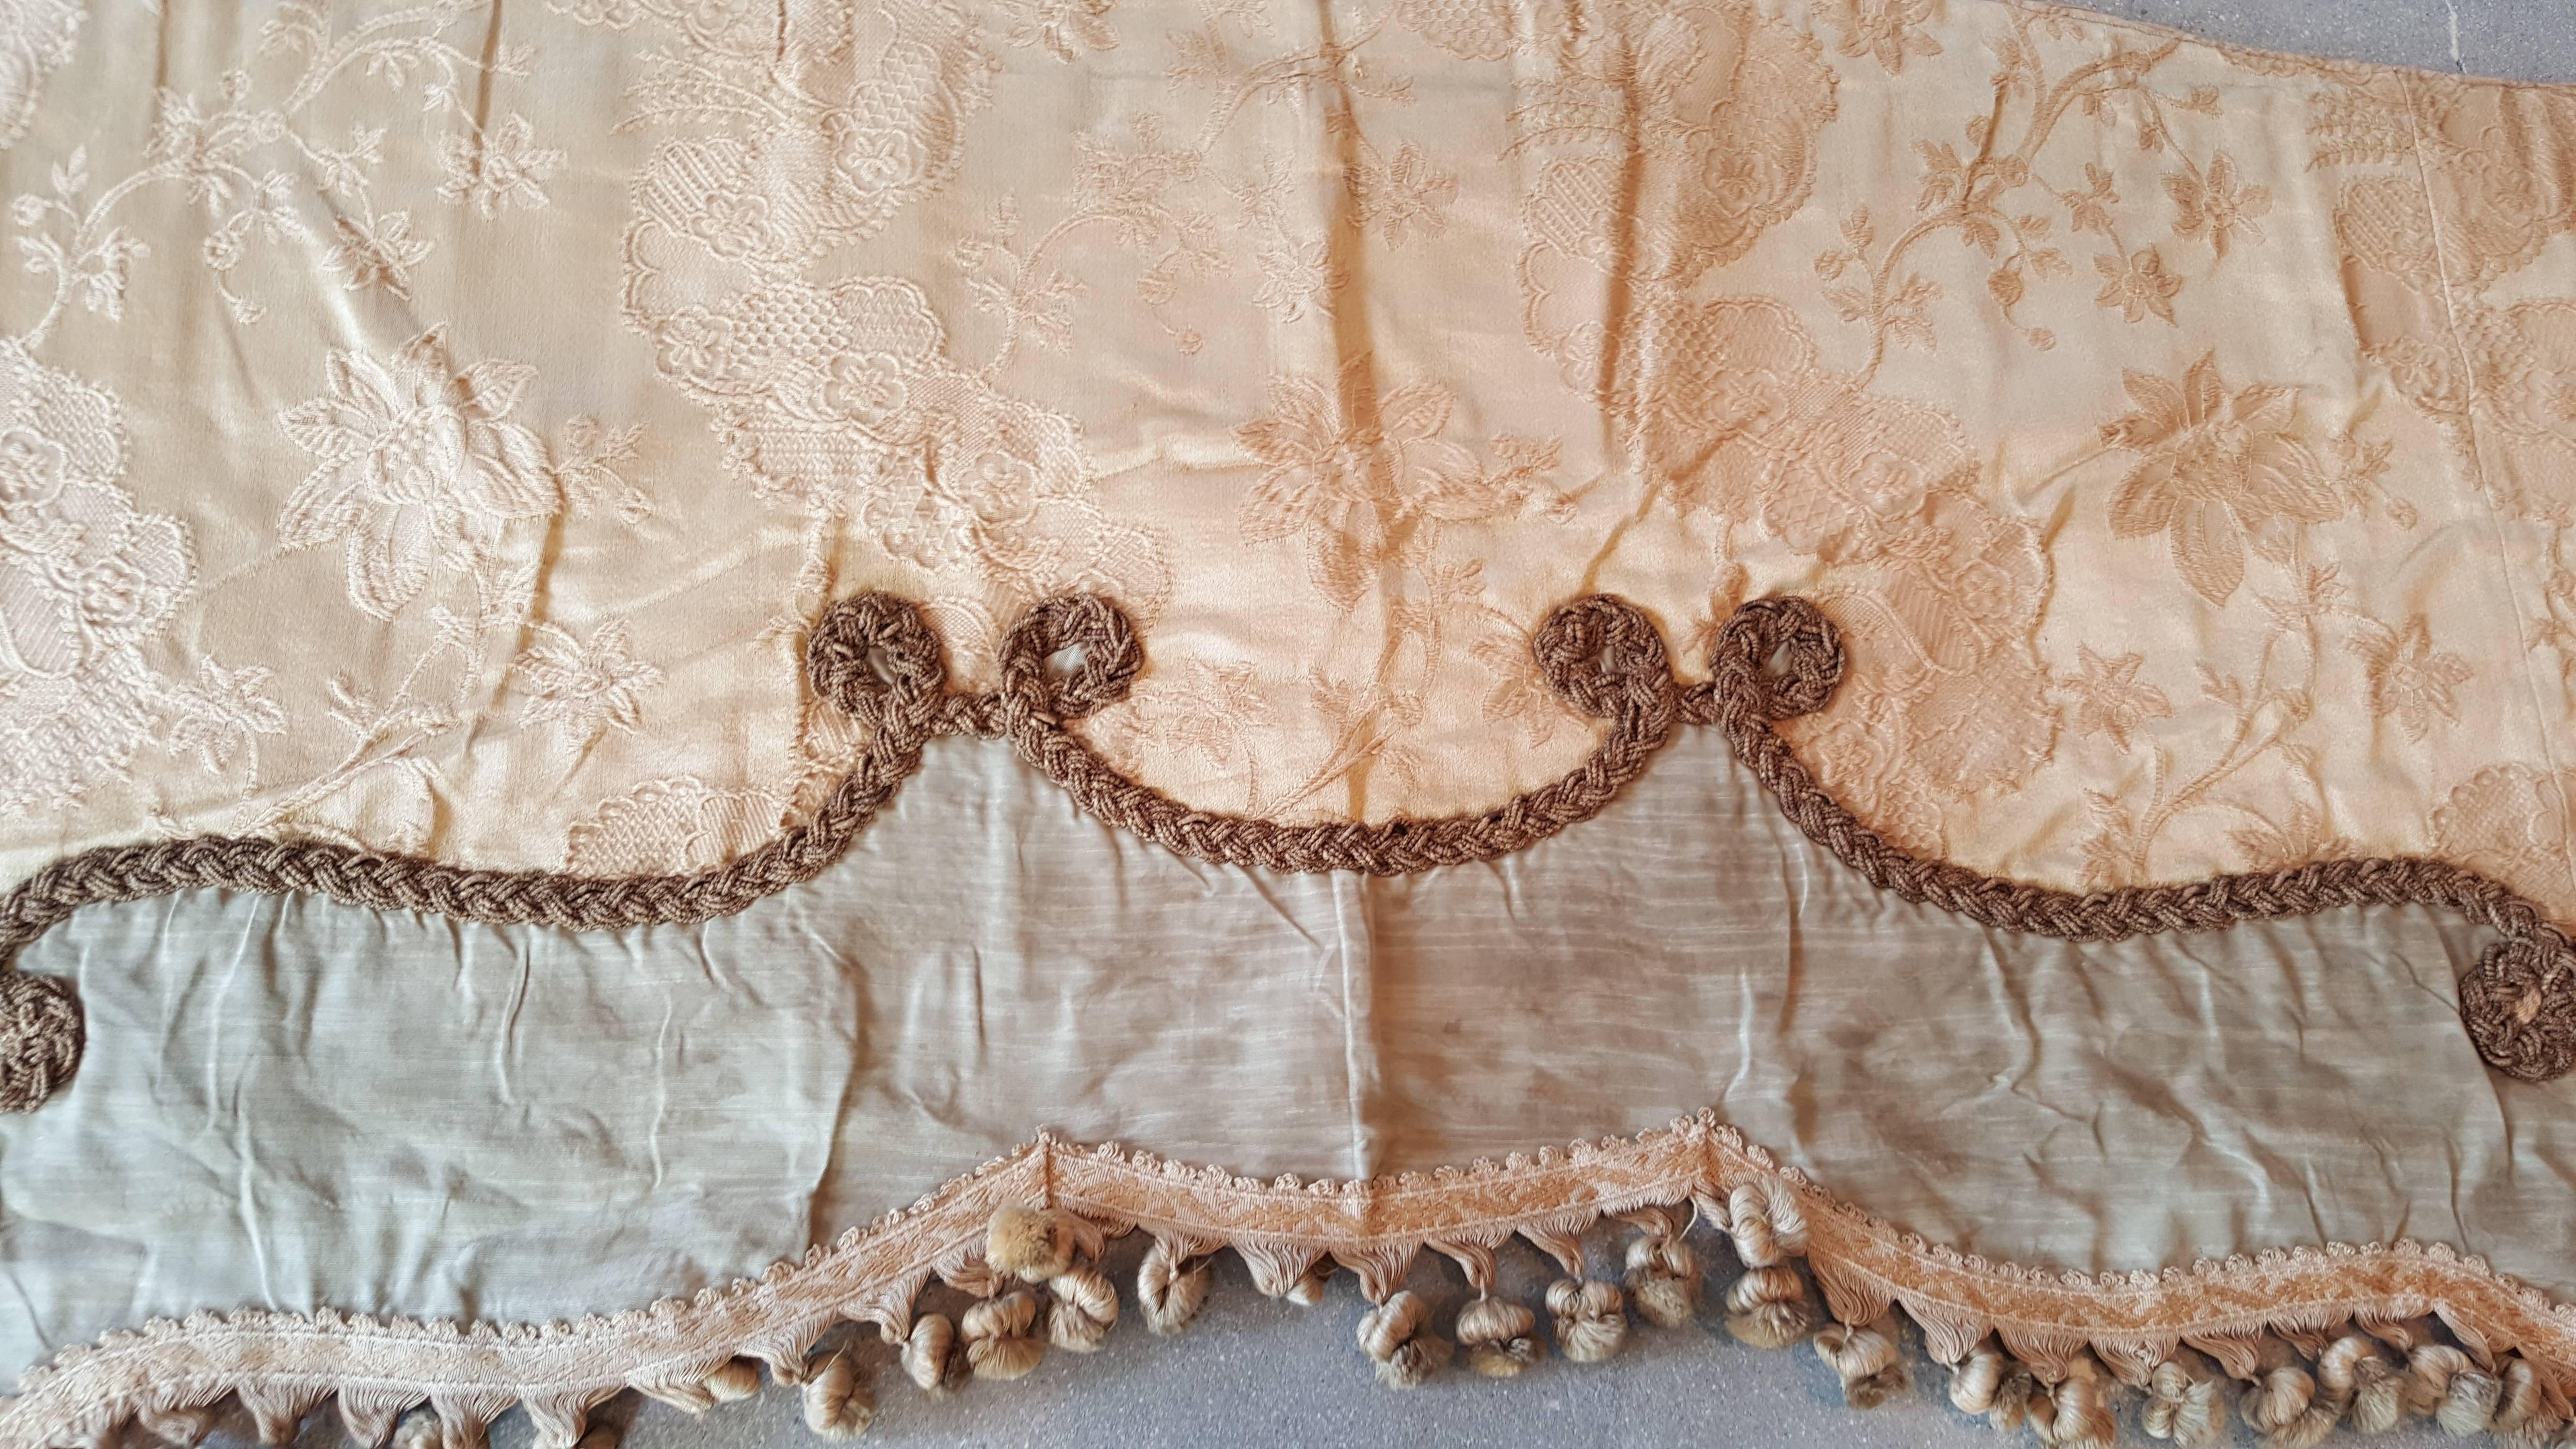 This antique French textile is a beautiful piece in perfect condition with very little wear aside from its metallic roped design that has lost it's metallic patina. Its size allows for many different uses from bedding to pillows and original use as